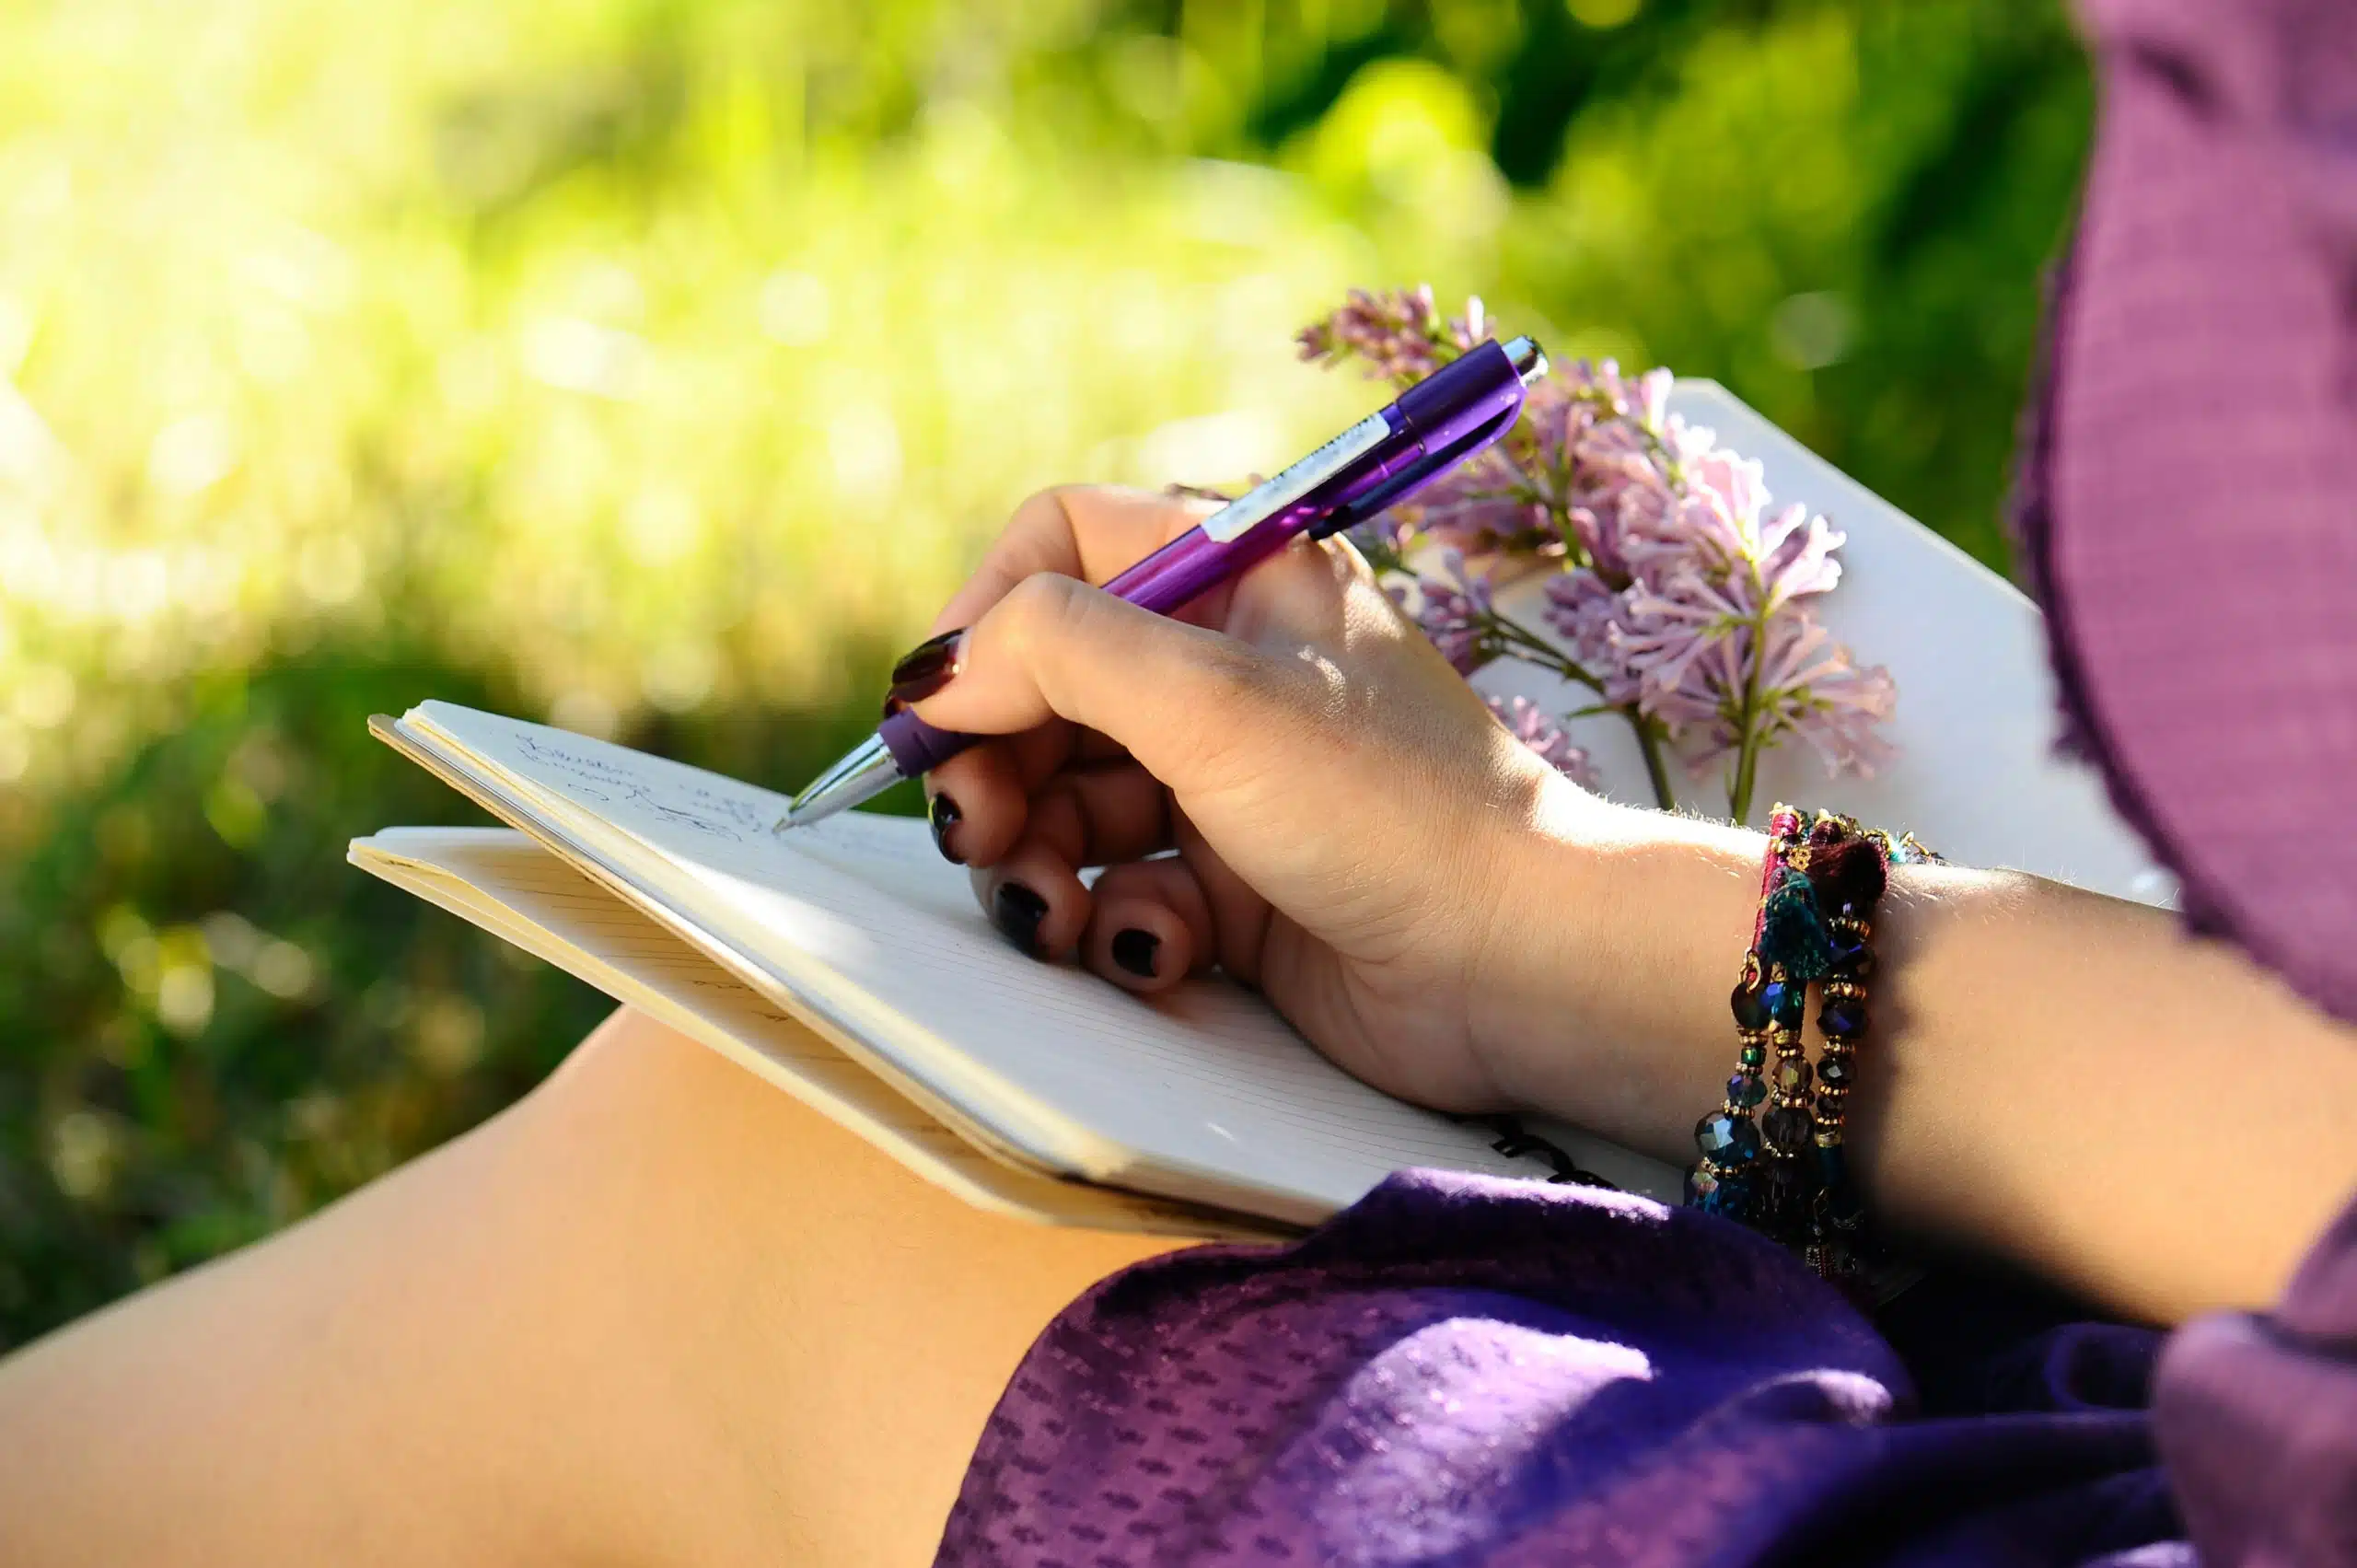 Woman in purple dress writing in her notebook outdoors.